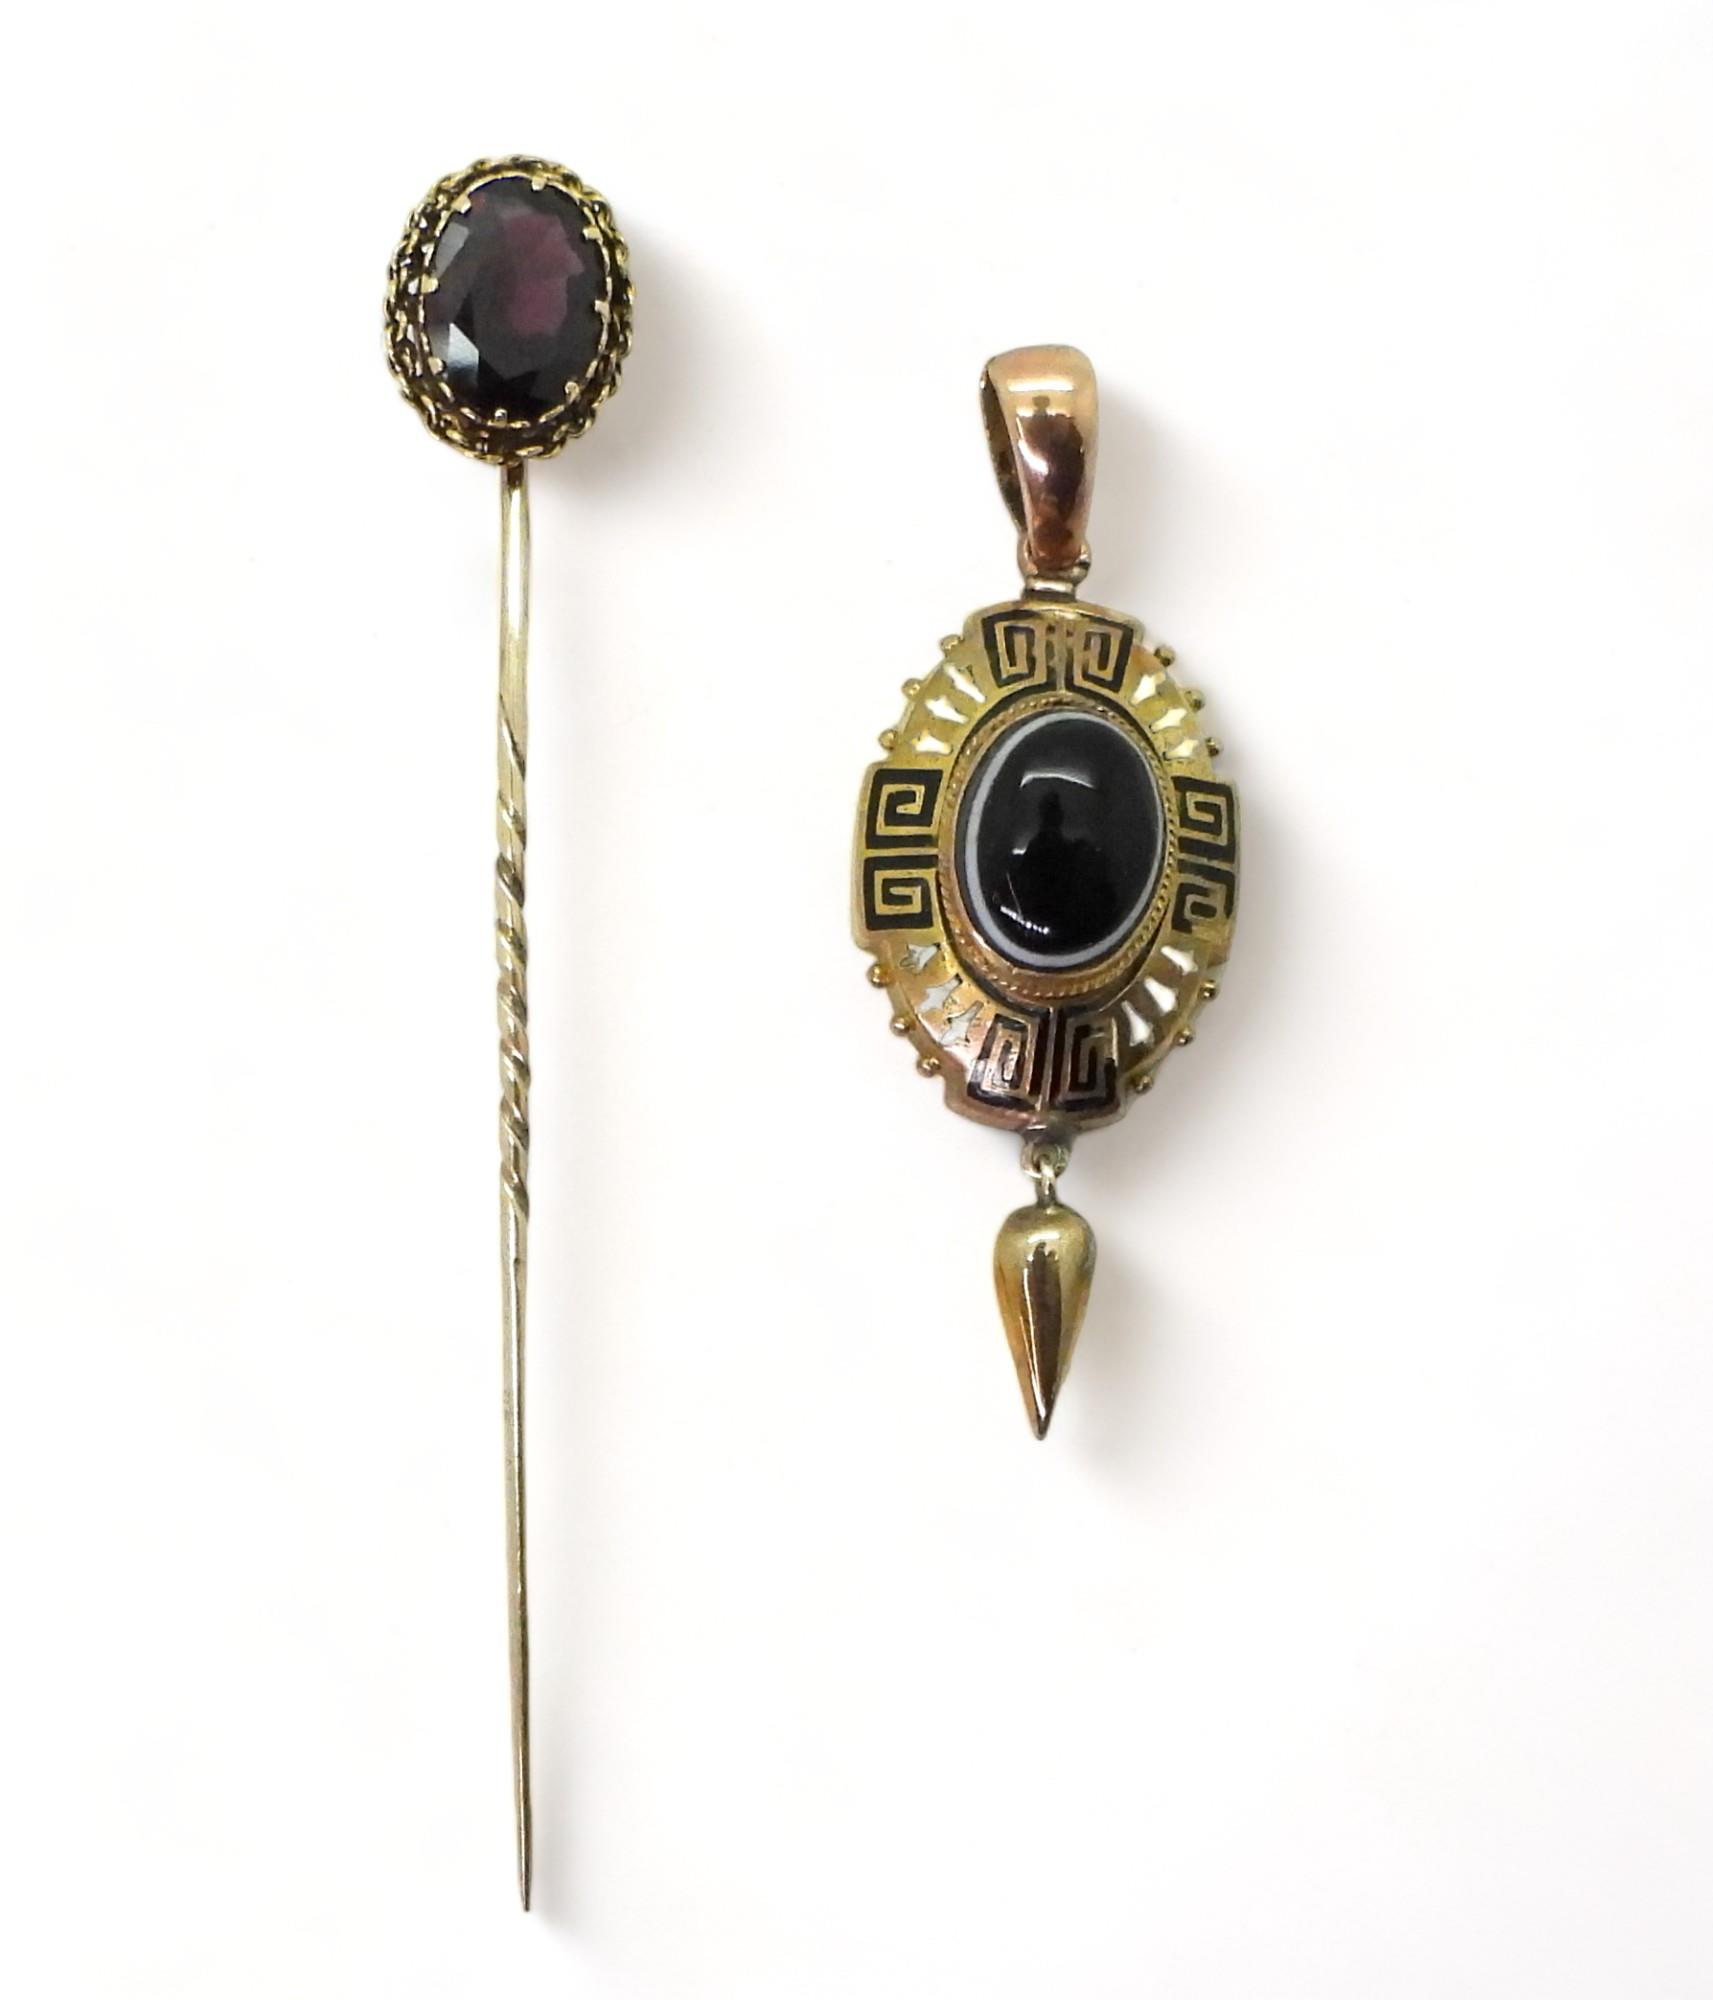 A Victorian yellow metal pendant set with a Bull's eye agate, with black and white Greek key and bud